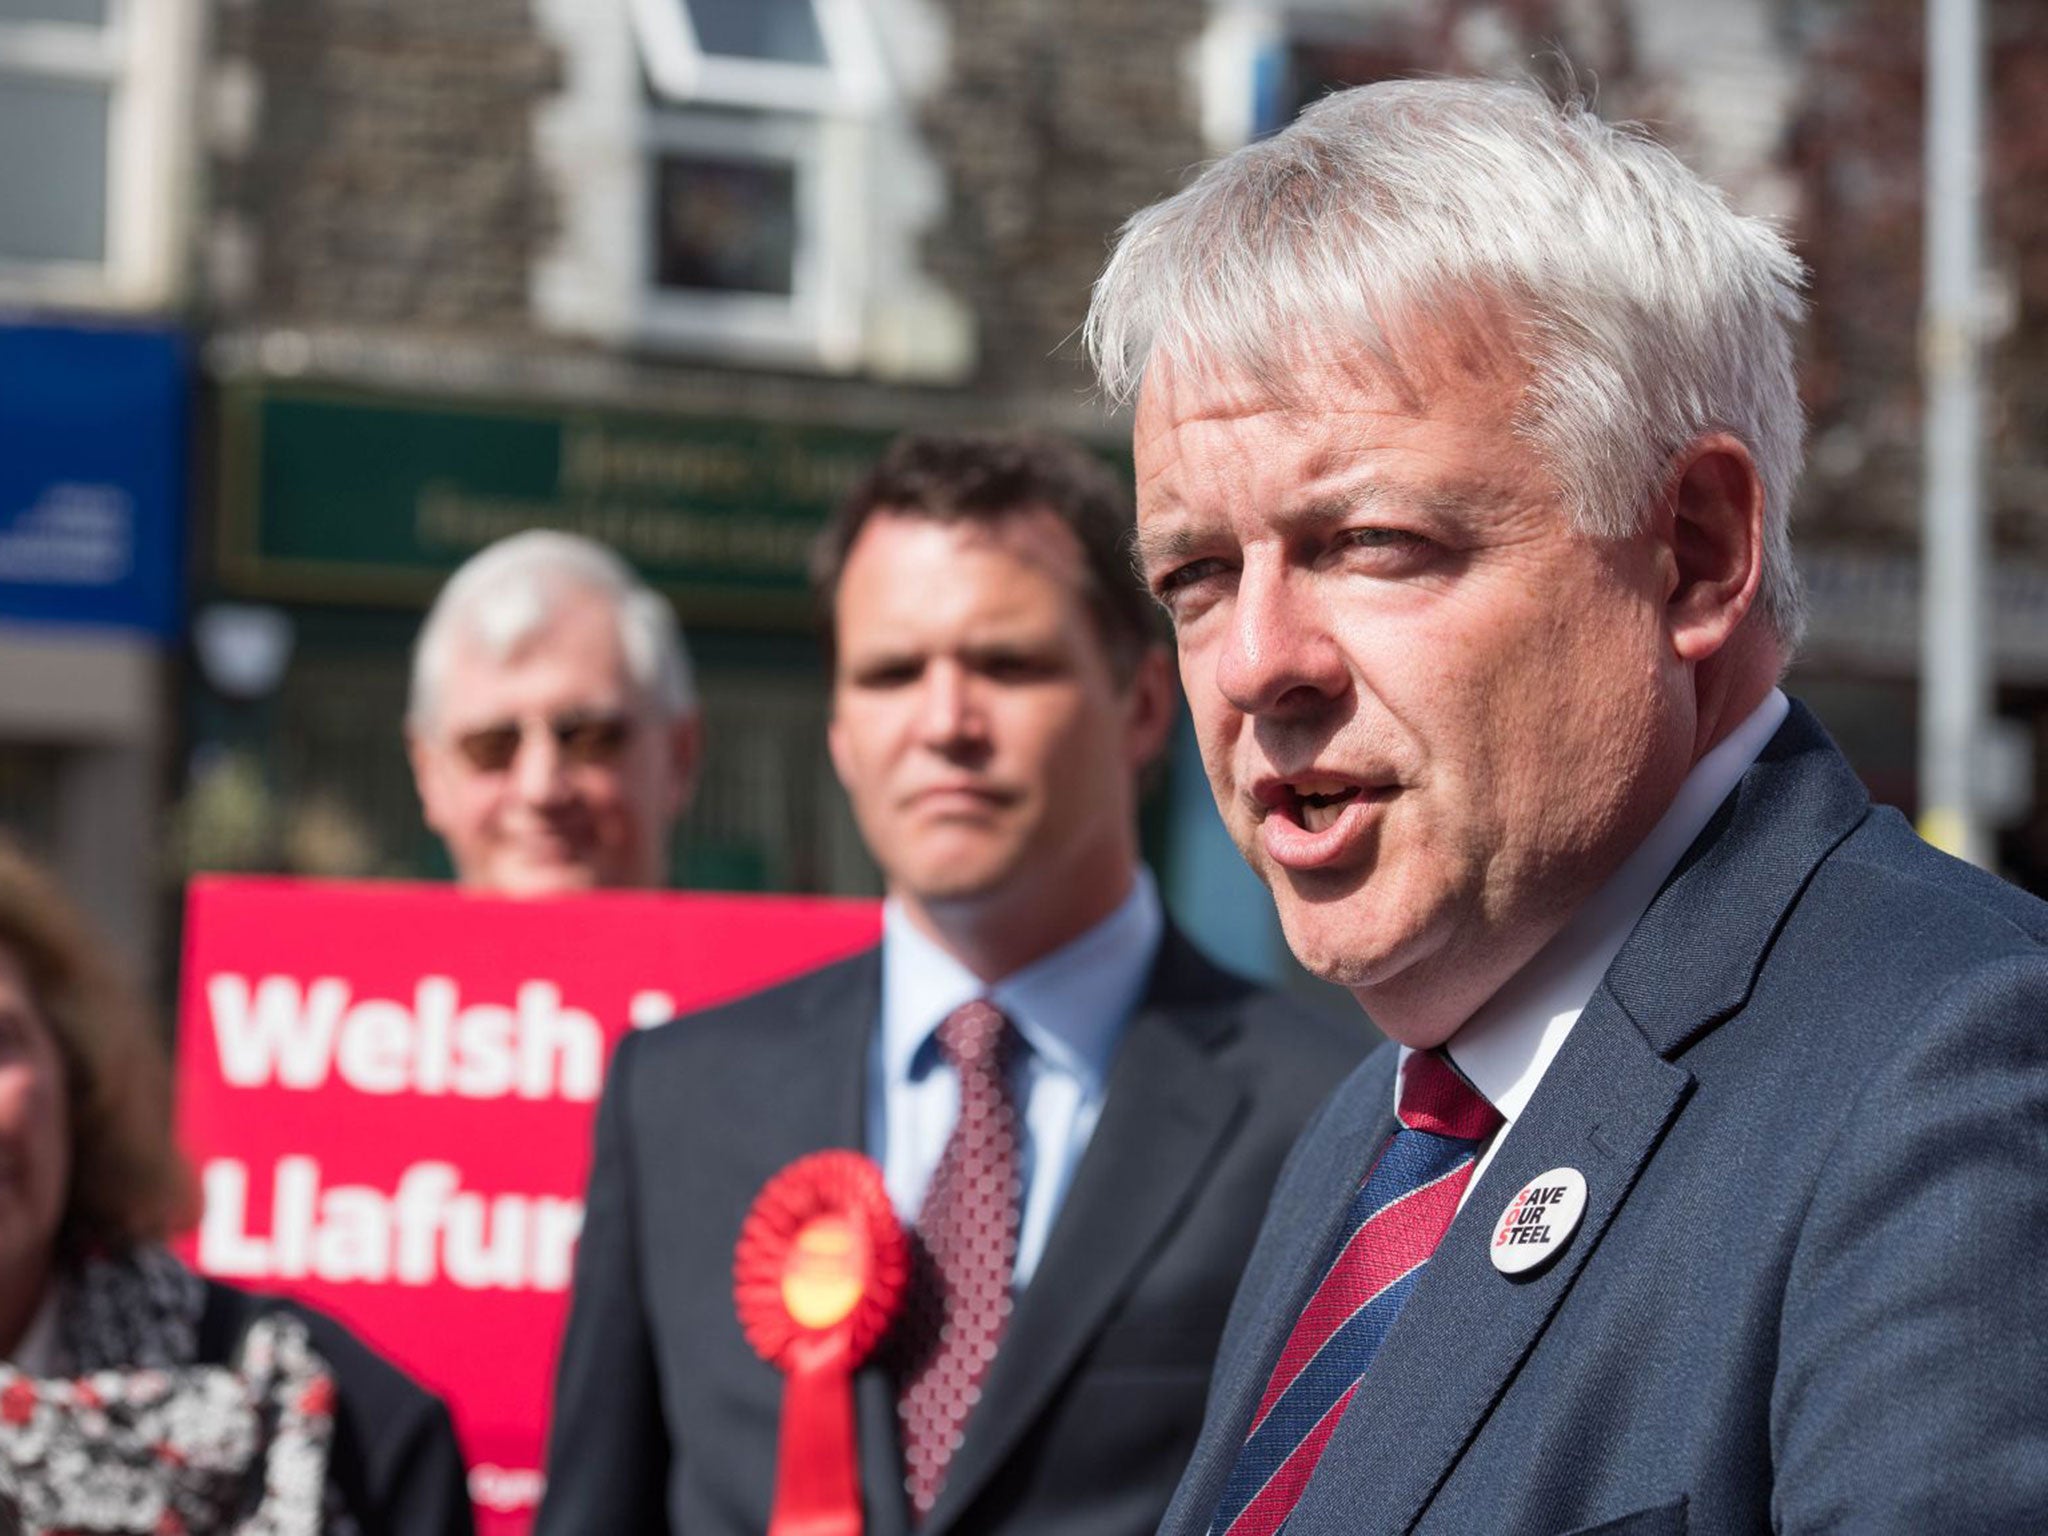 Carwyn Jones has said Theresa May is trying to 'hijack' powers that belong to Wales